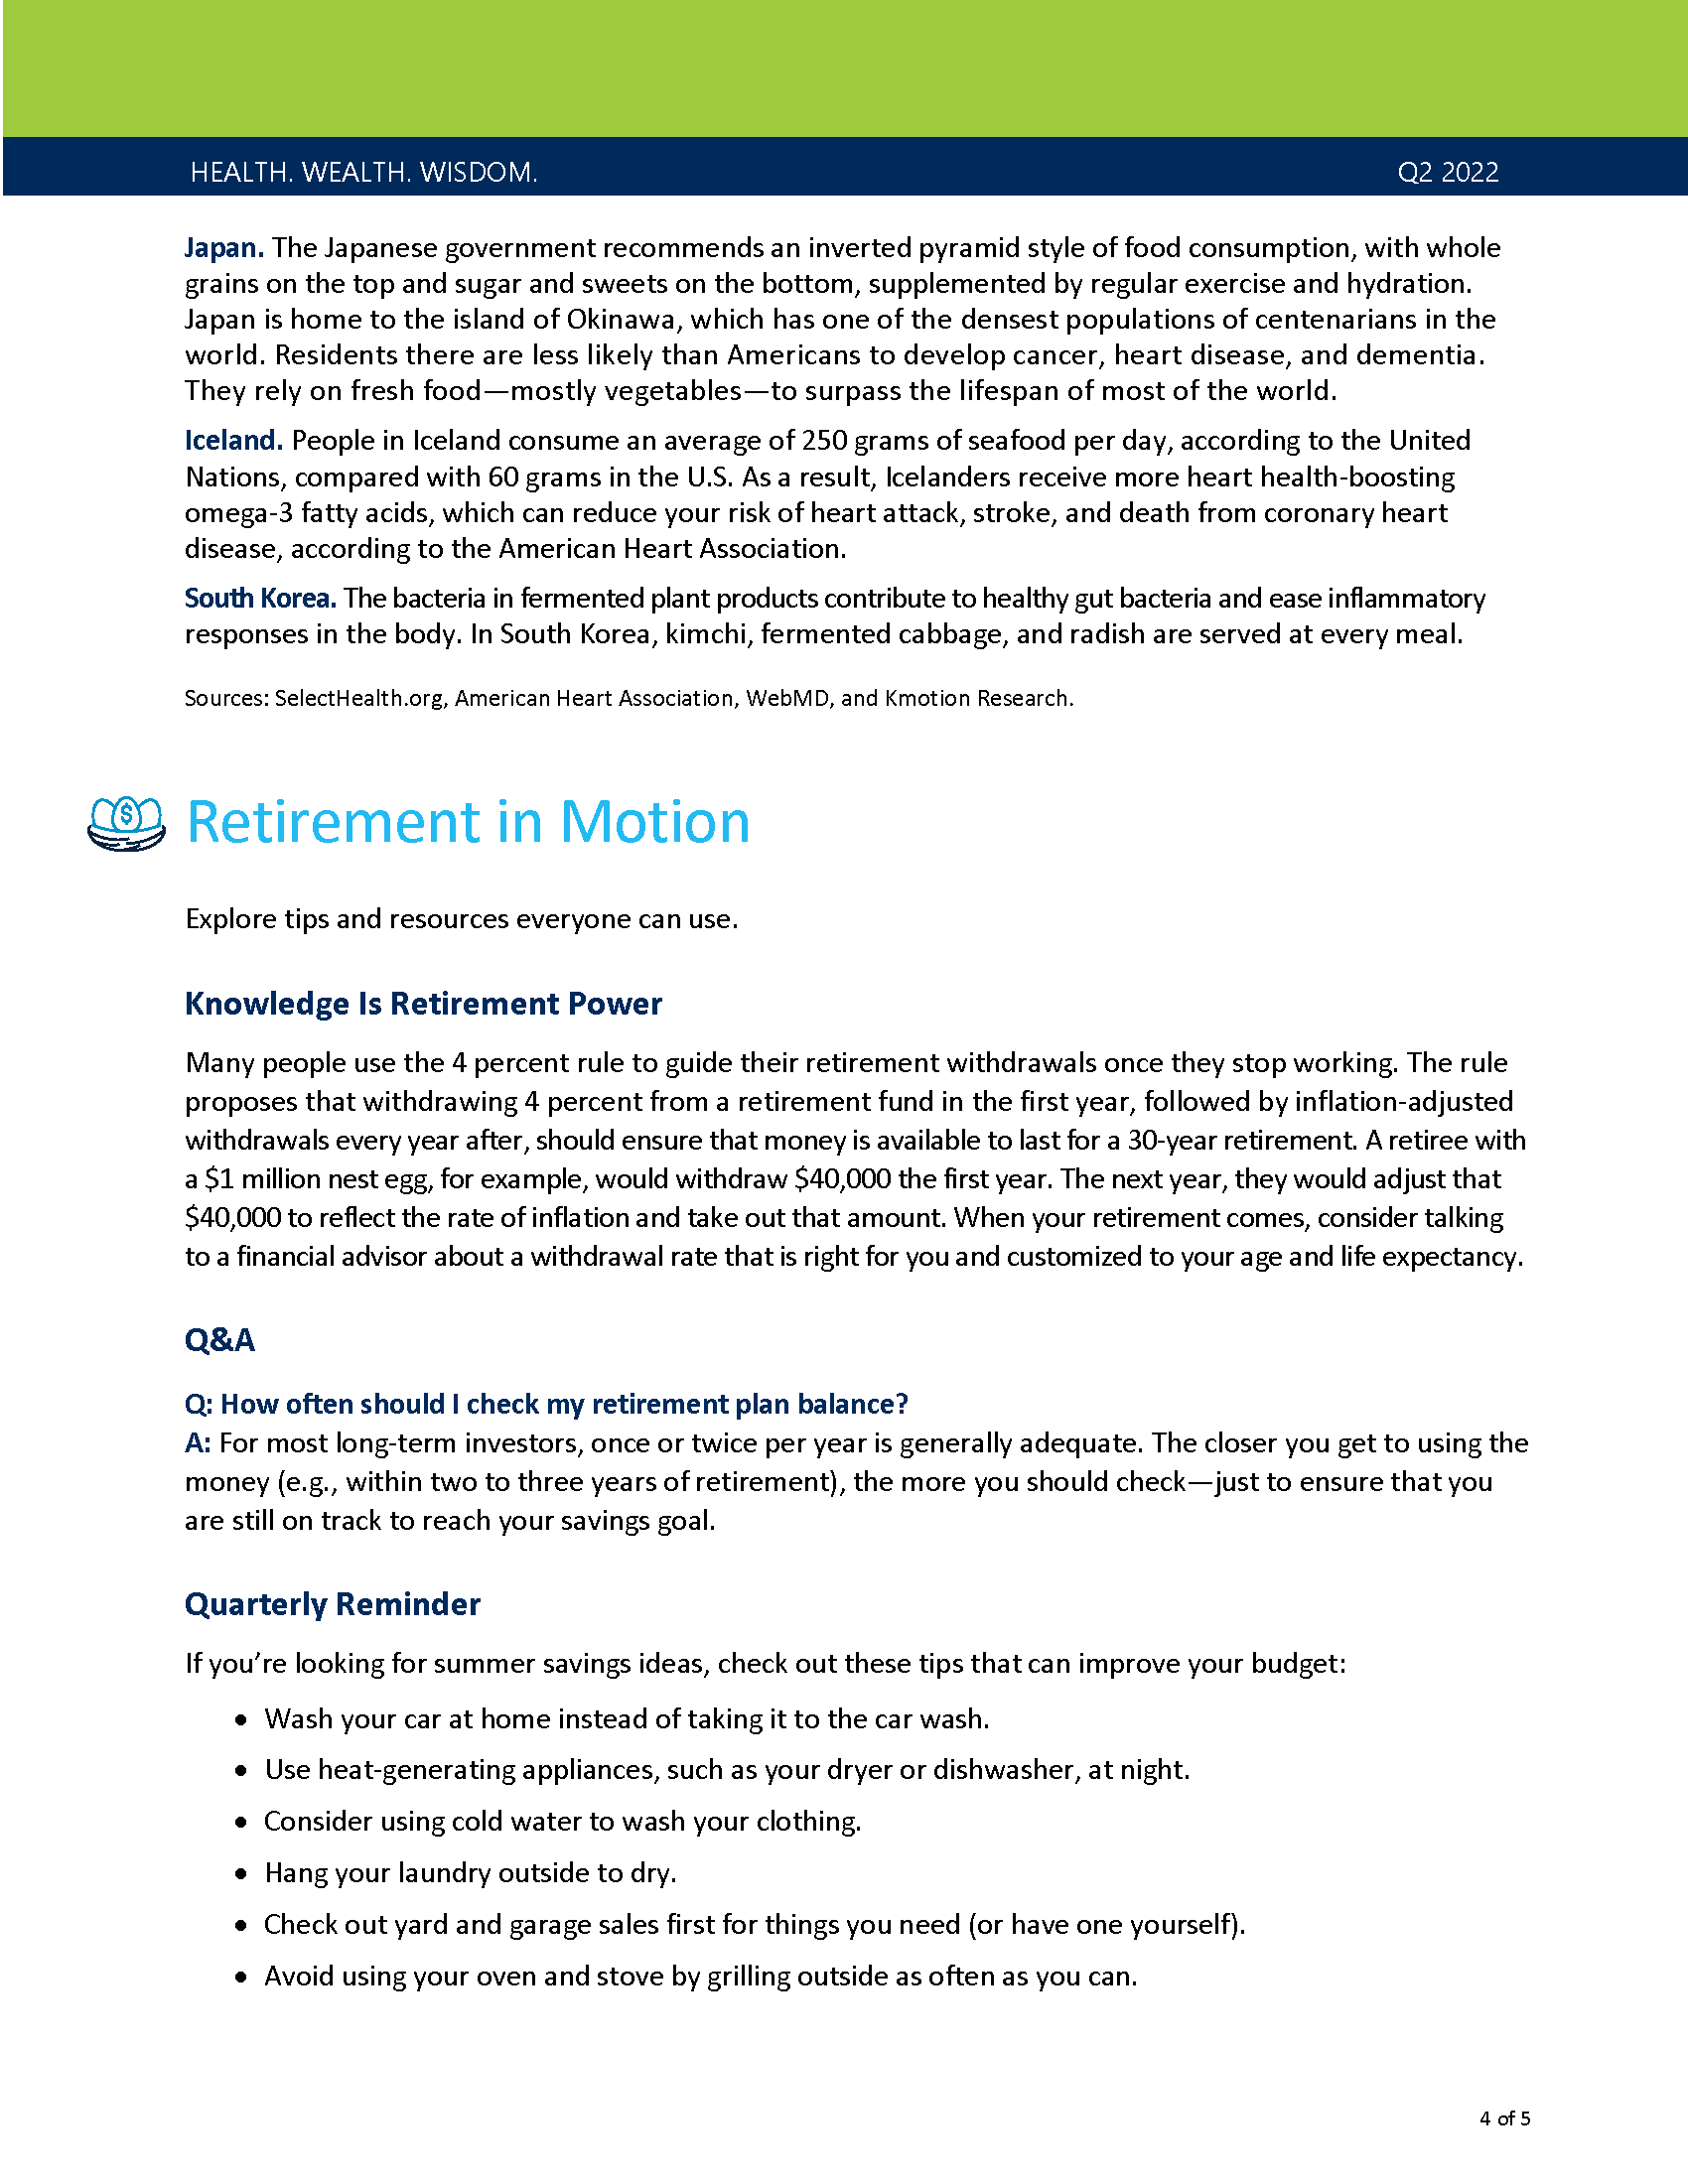 2022-08-01 Plan Participant Newsletter_Page_4